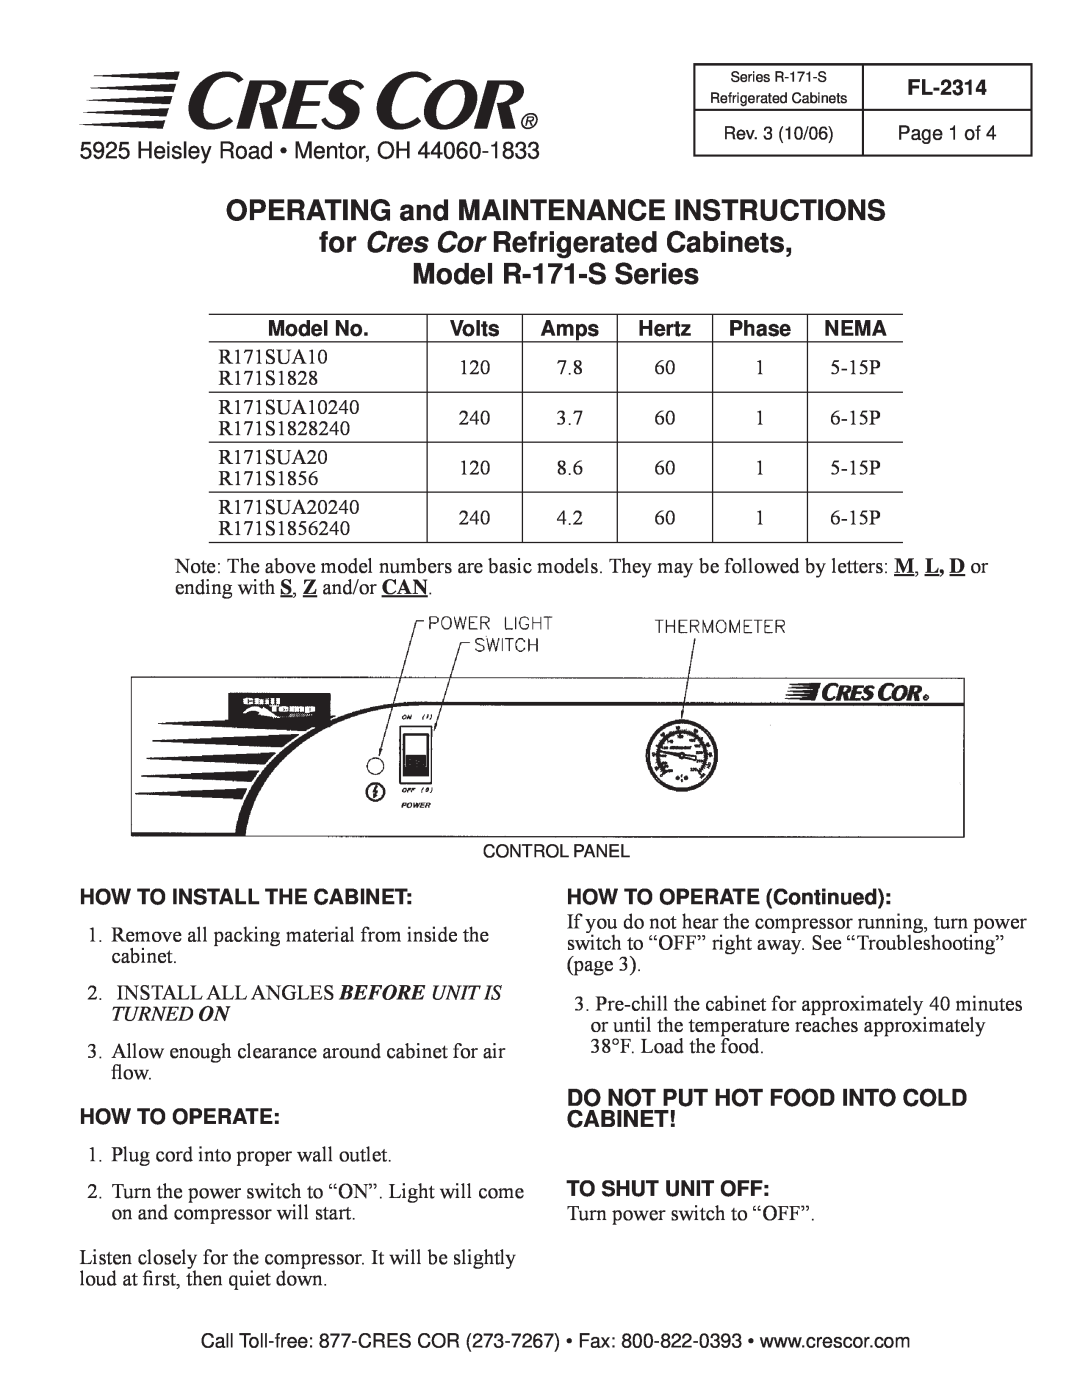 Cres Cor R171SUA10240, R171SUA20 manual OPERATING and MAINTENANCE INSTRUCTIONS, for Cres Cor Refrigerated Cabinets 